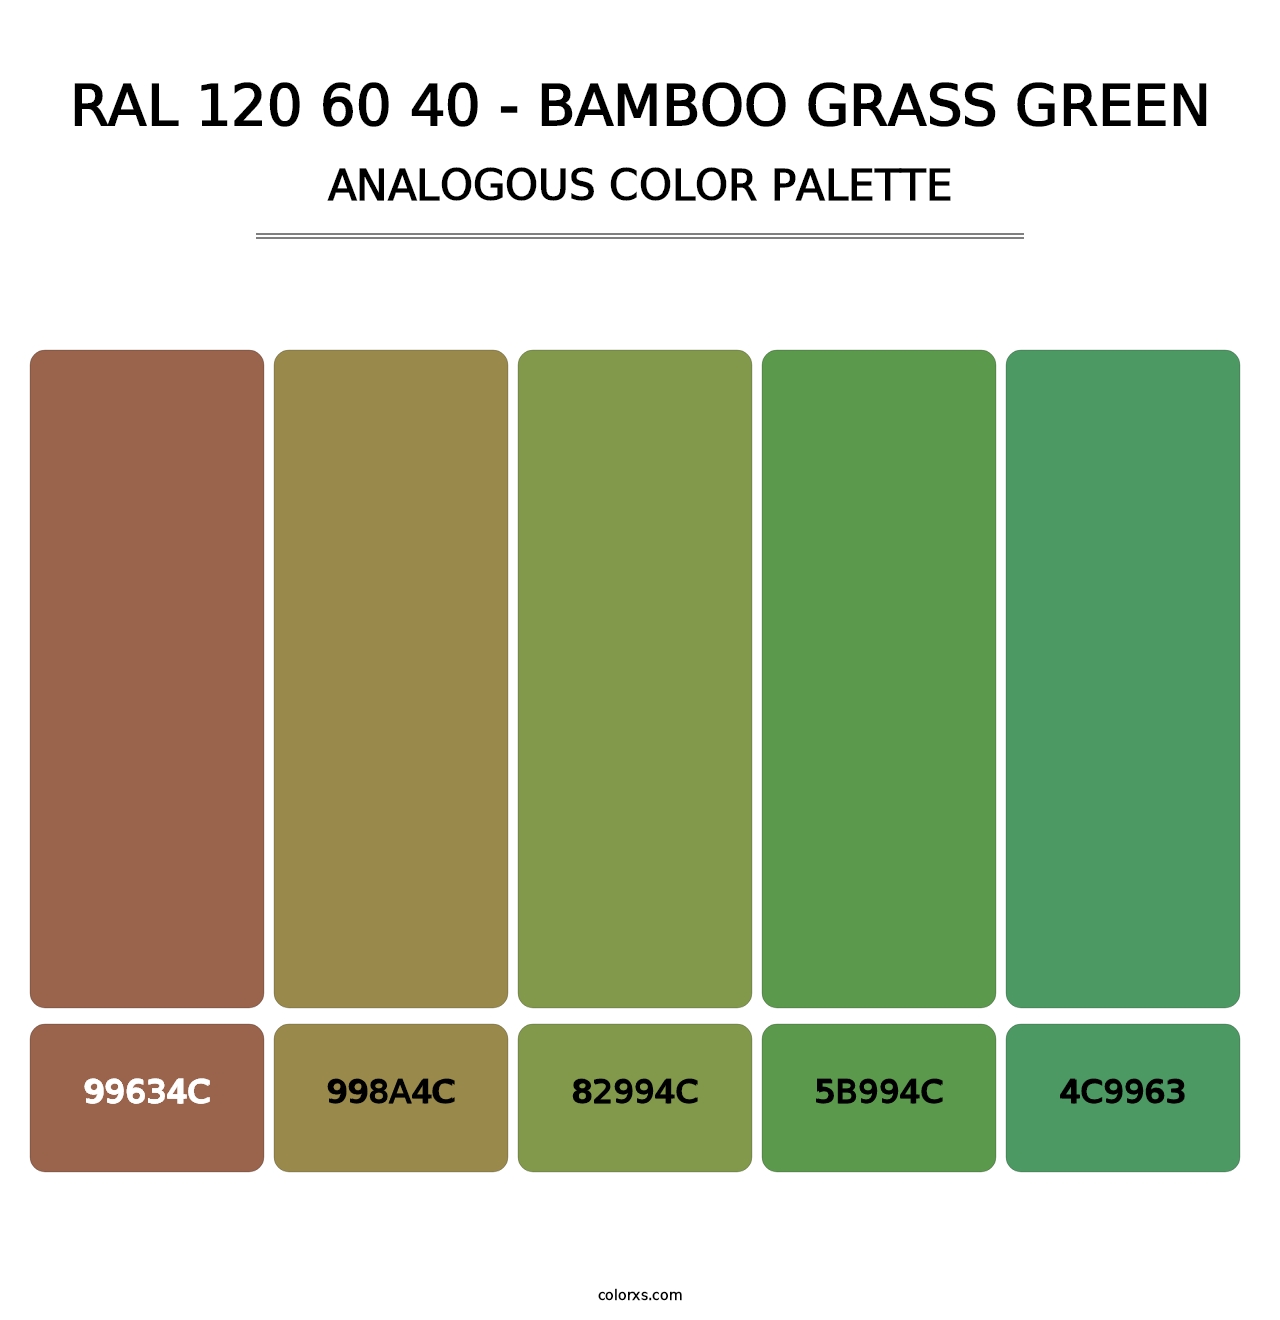 RAL 120 60 40 - Bamboo Grass Green - Analogous Color Palette